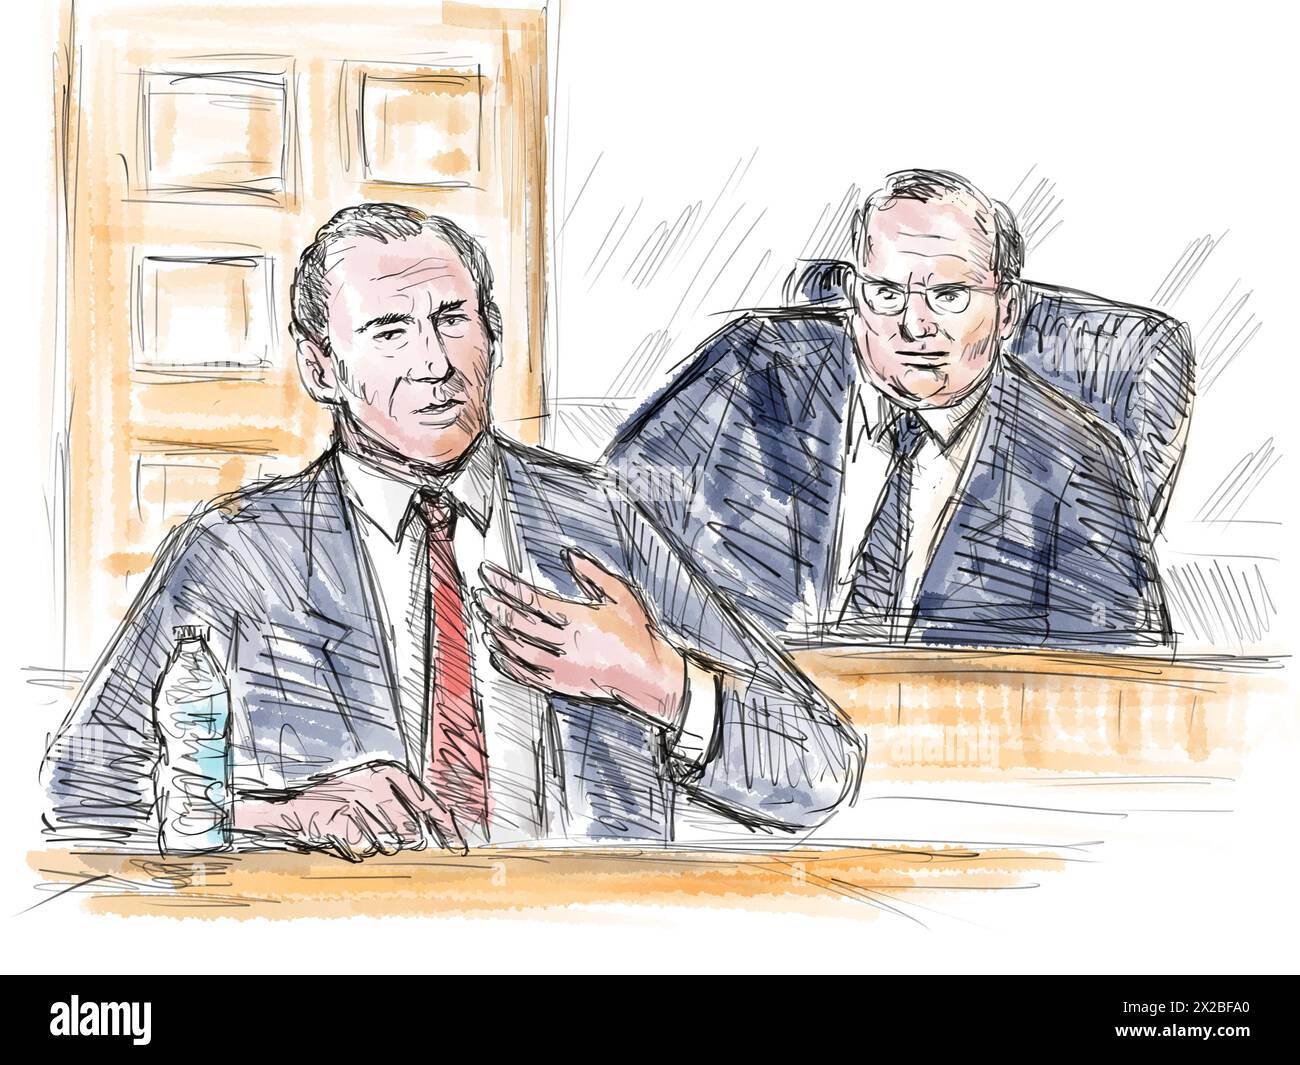 Pastel pencil pen and ink sketch illustration of a courtroom trial setting with judge and defendant, plaintiff, witness testifying on a court case dra Stock Photo